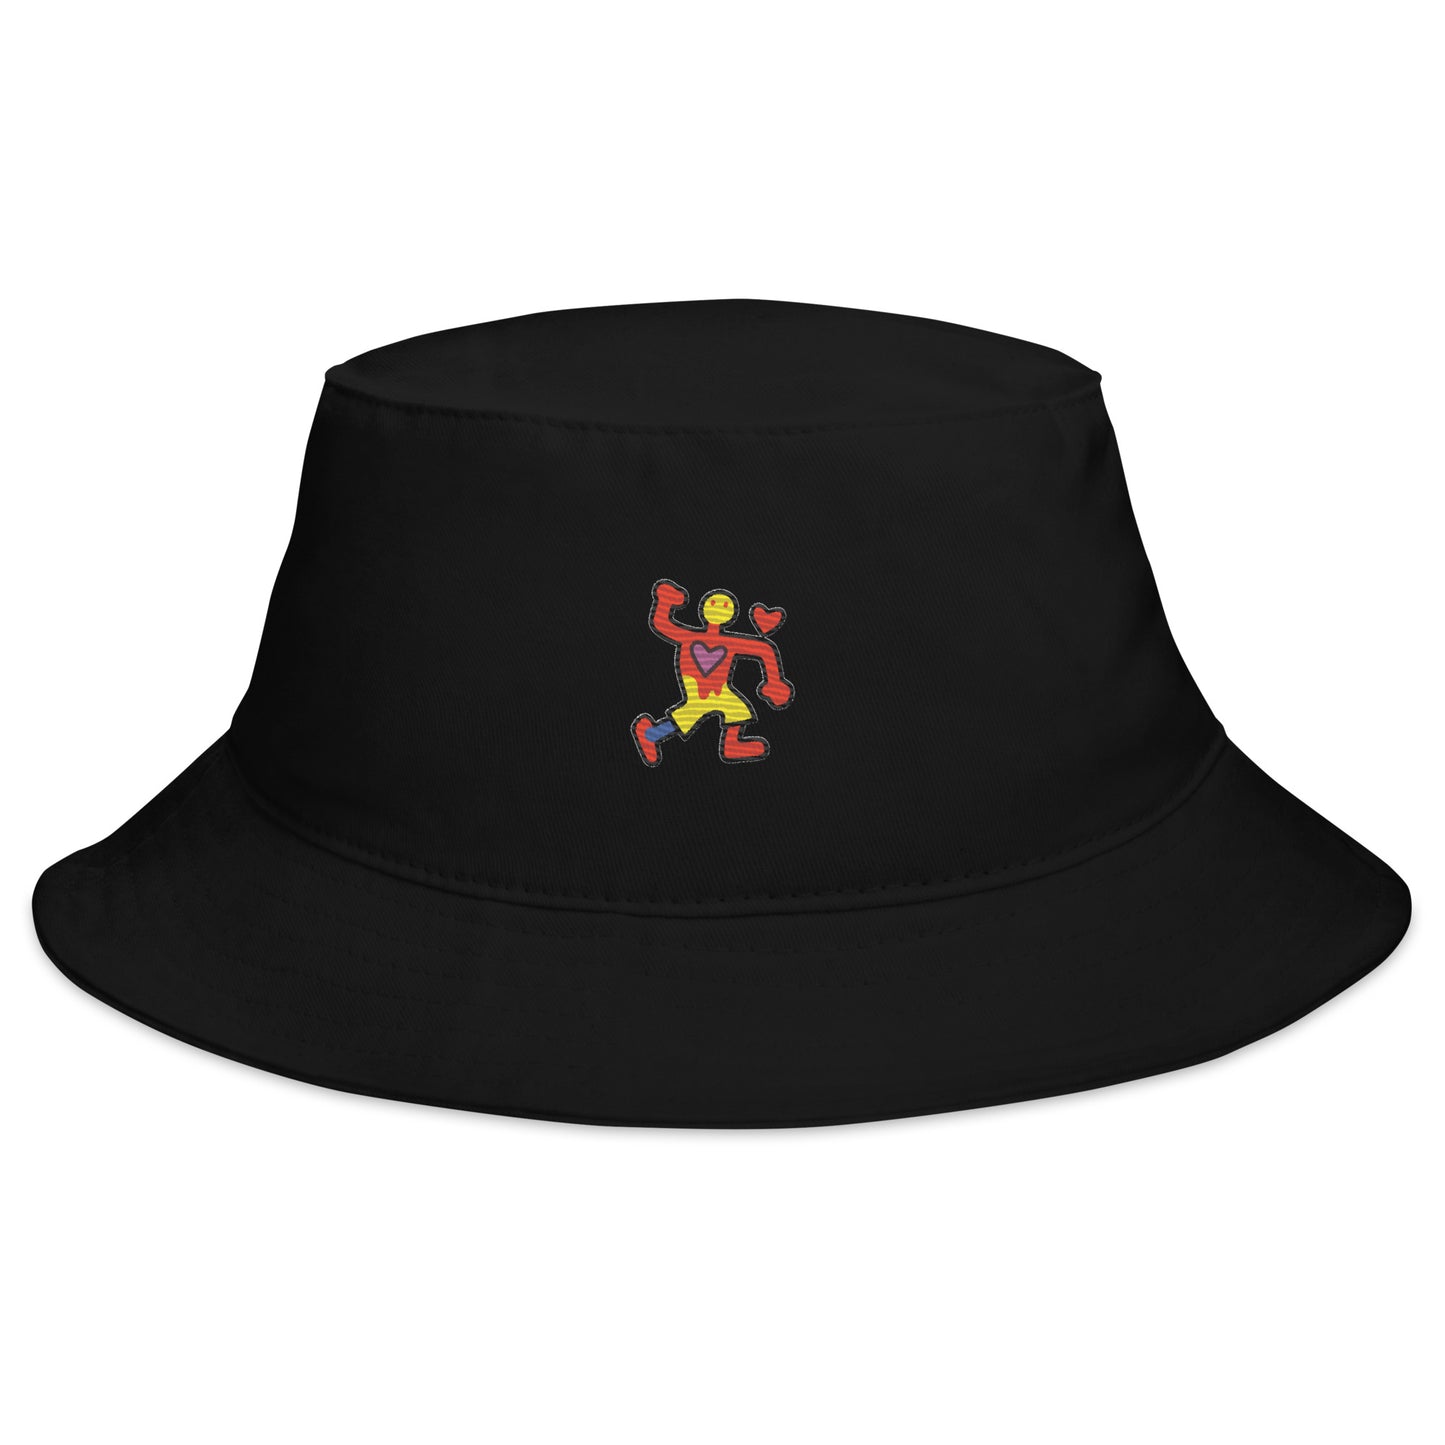 Doodles Me "Most Wanted" Bucket Hat #7